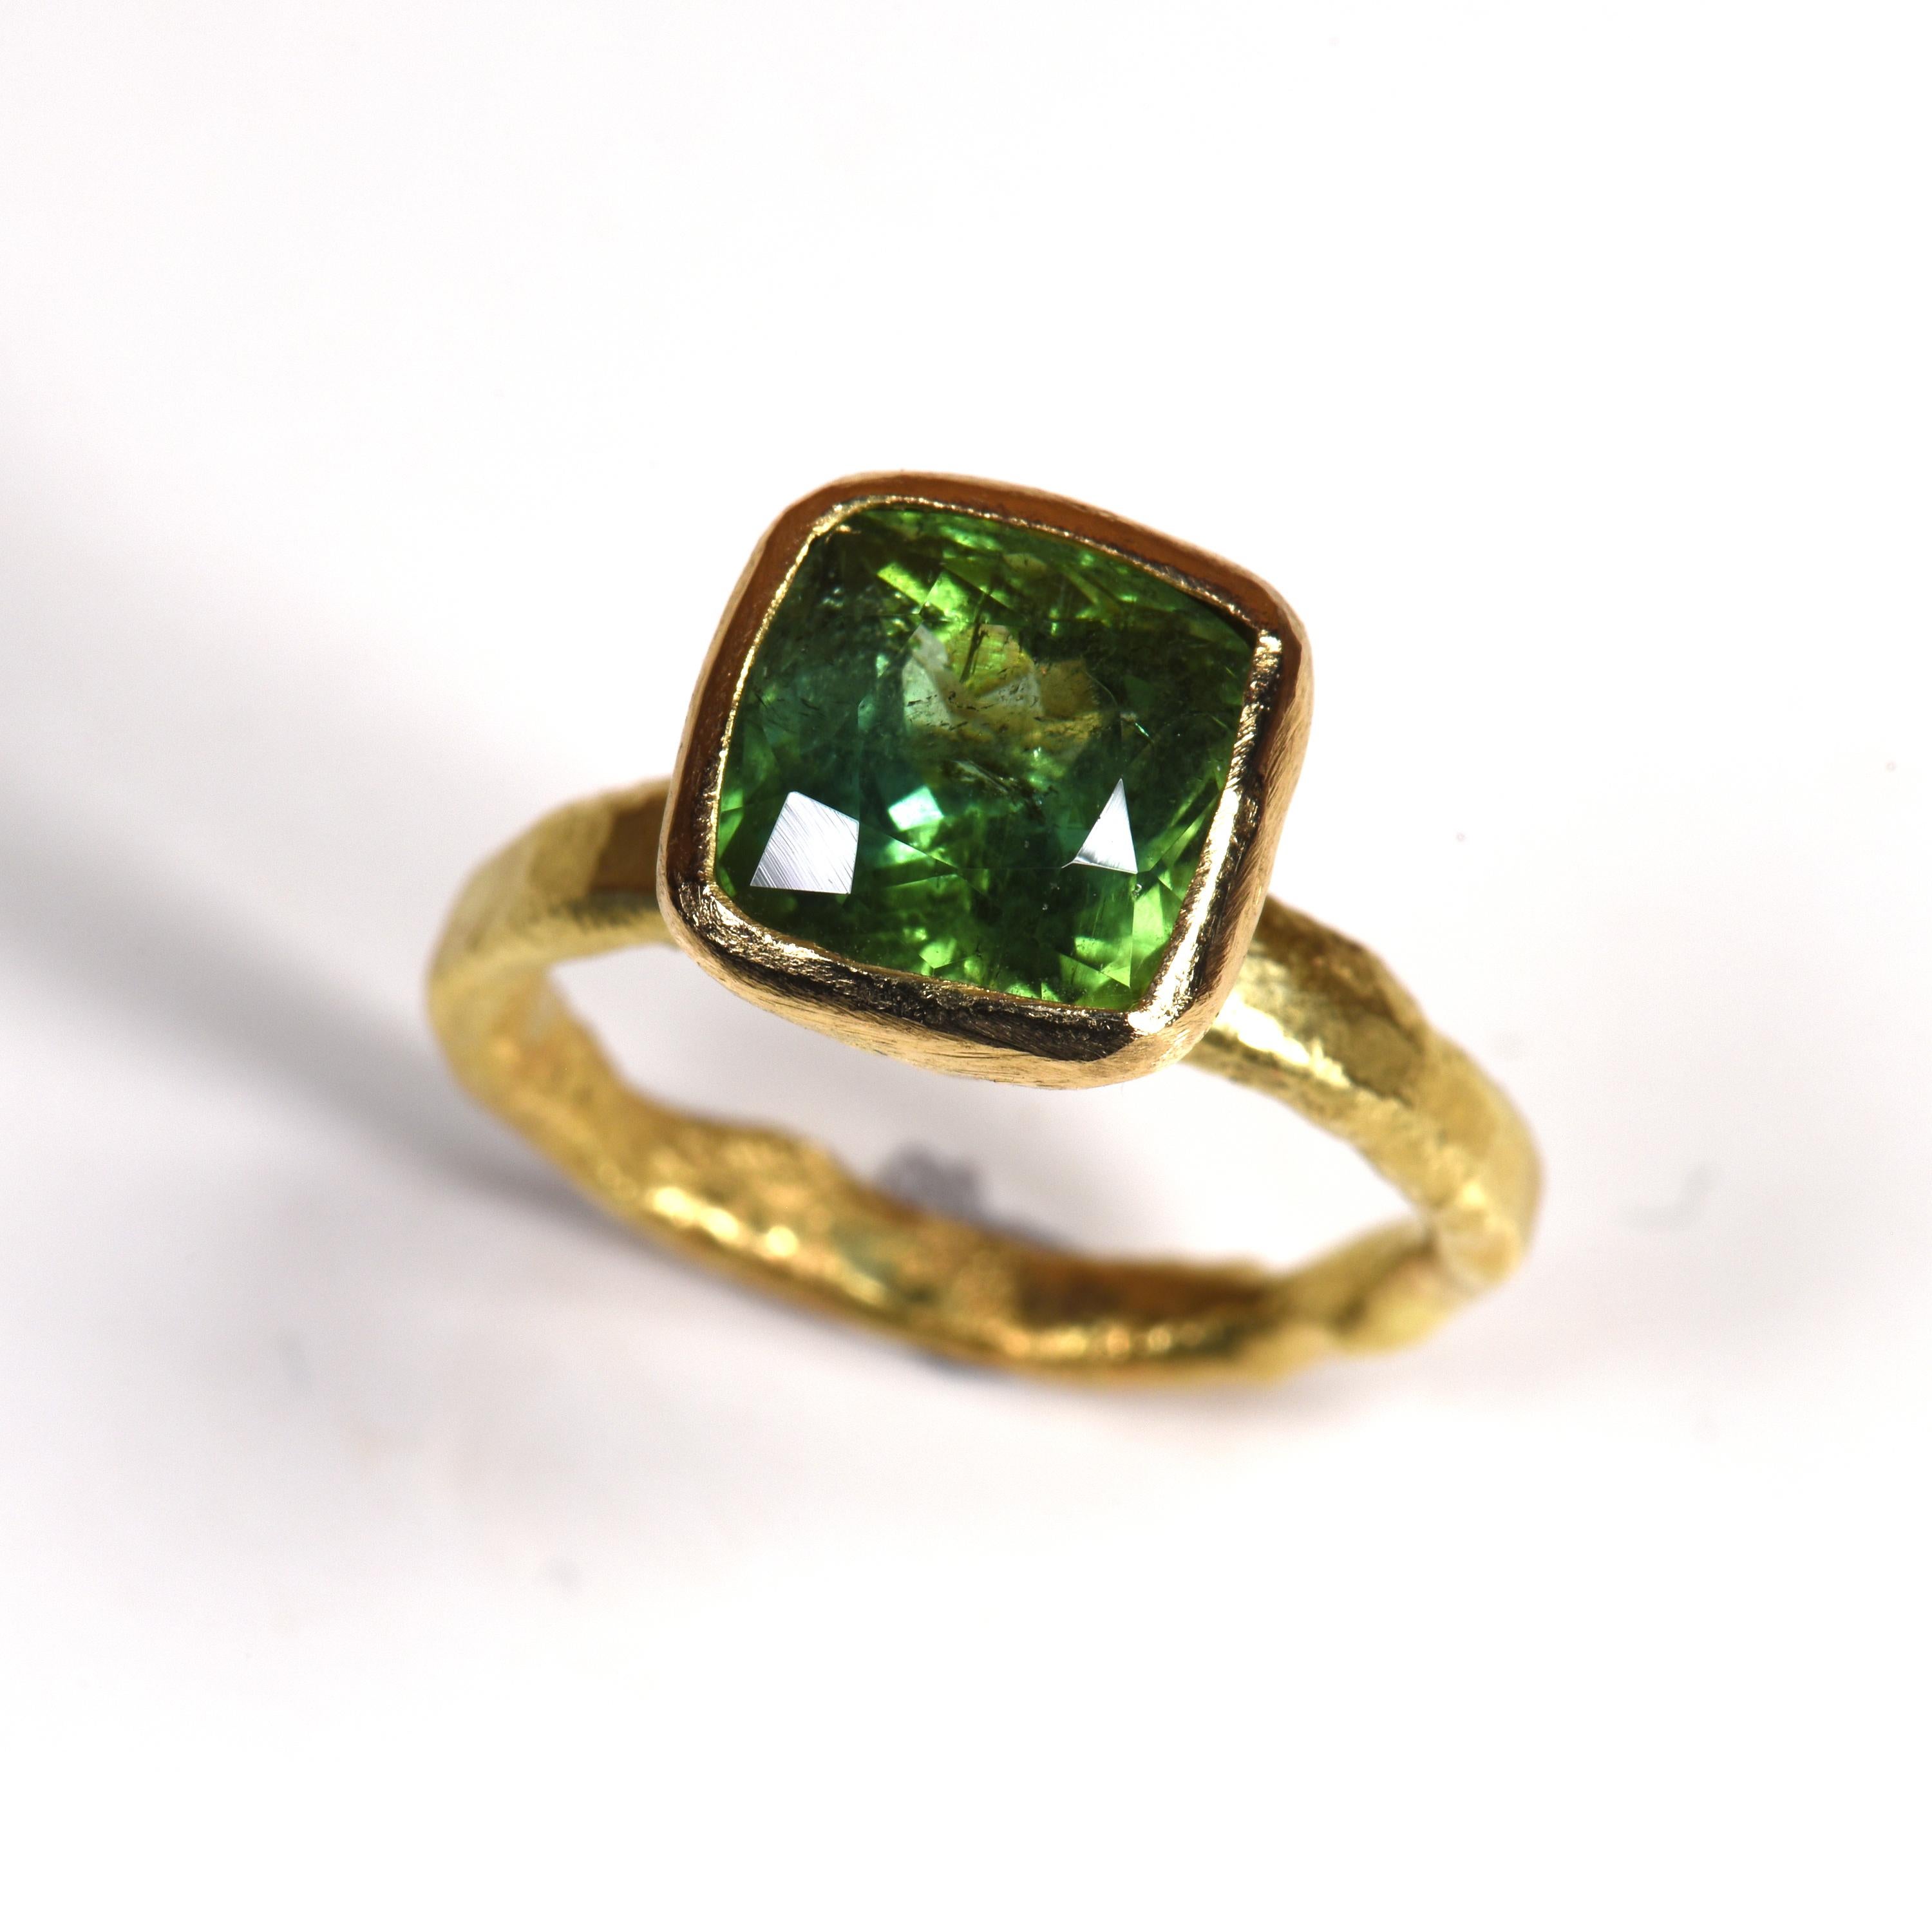 18k yellow gold melted using Disa Allsopp's signature reticulation and hammering techniques. A cushion cut Green tourmaline four carats in size is set in to a tapered rubover setting, framing the stunning colour of this Tourmaline.

Disa Allsopp is